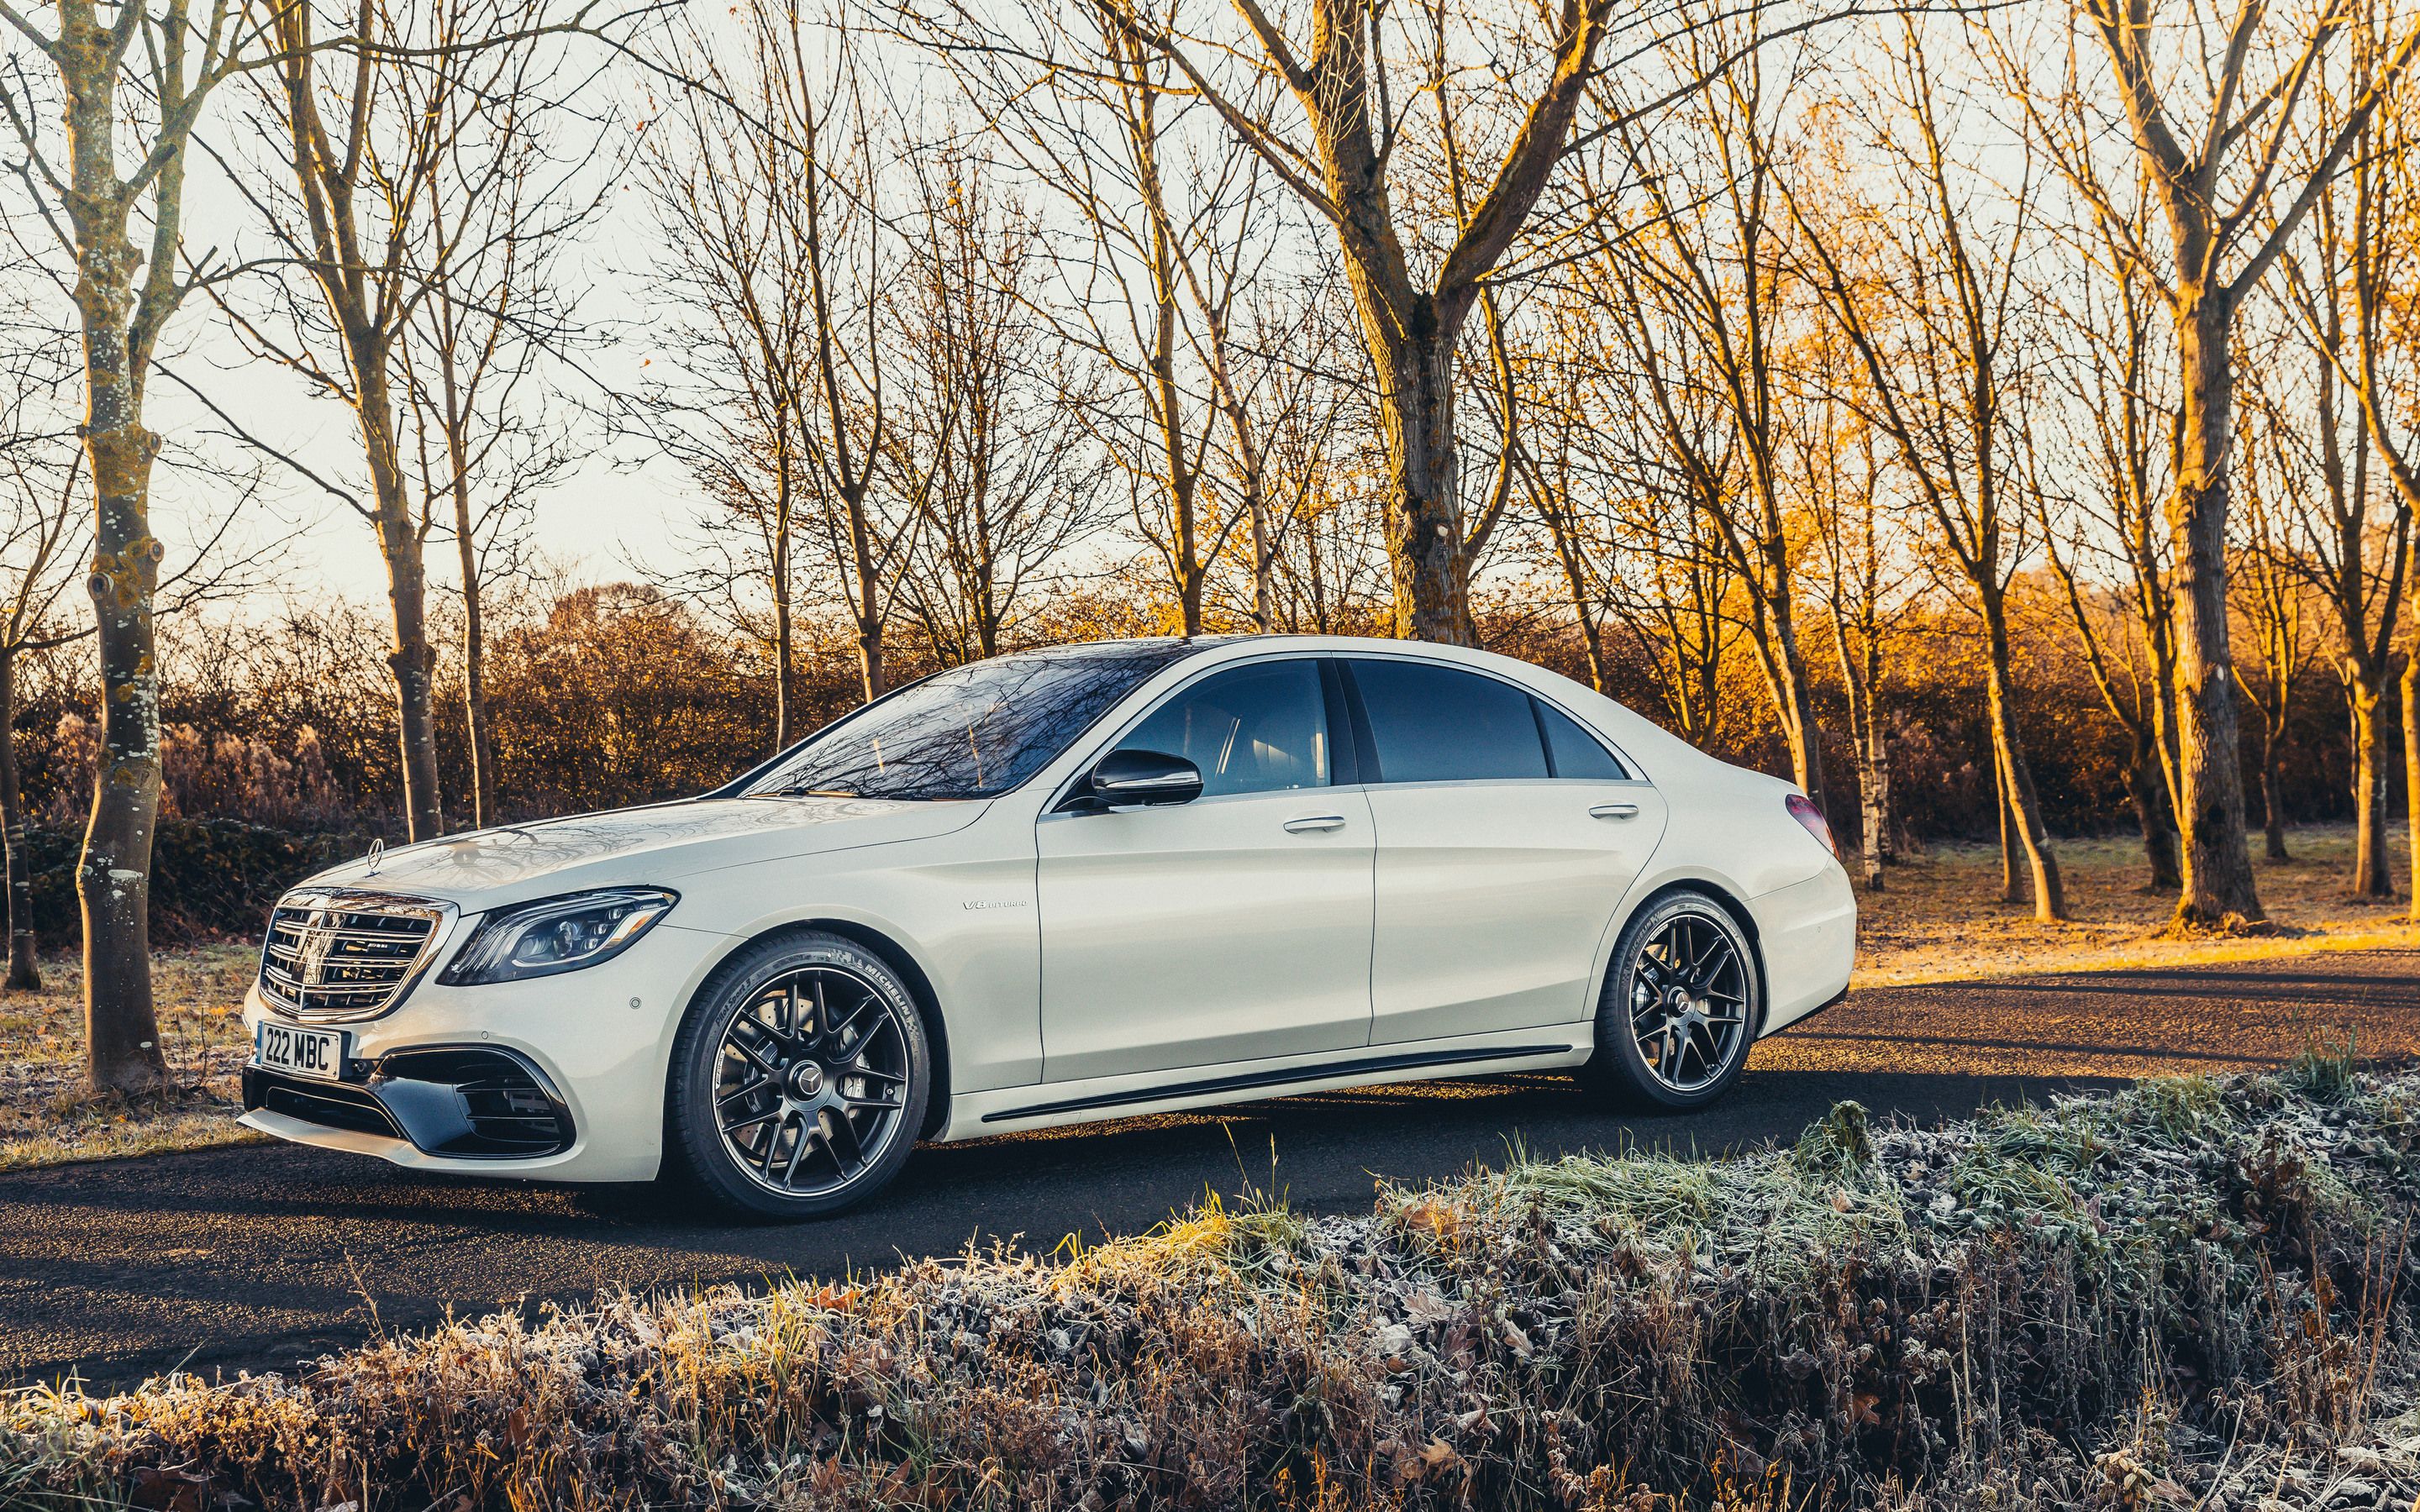 Mercedes-Benz S63 Amg Wallpapers